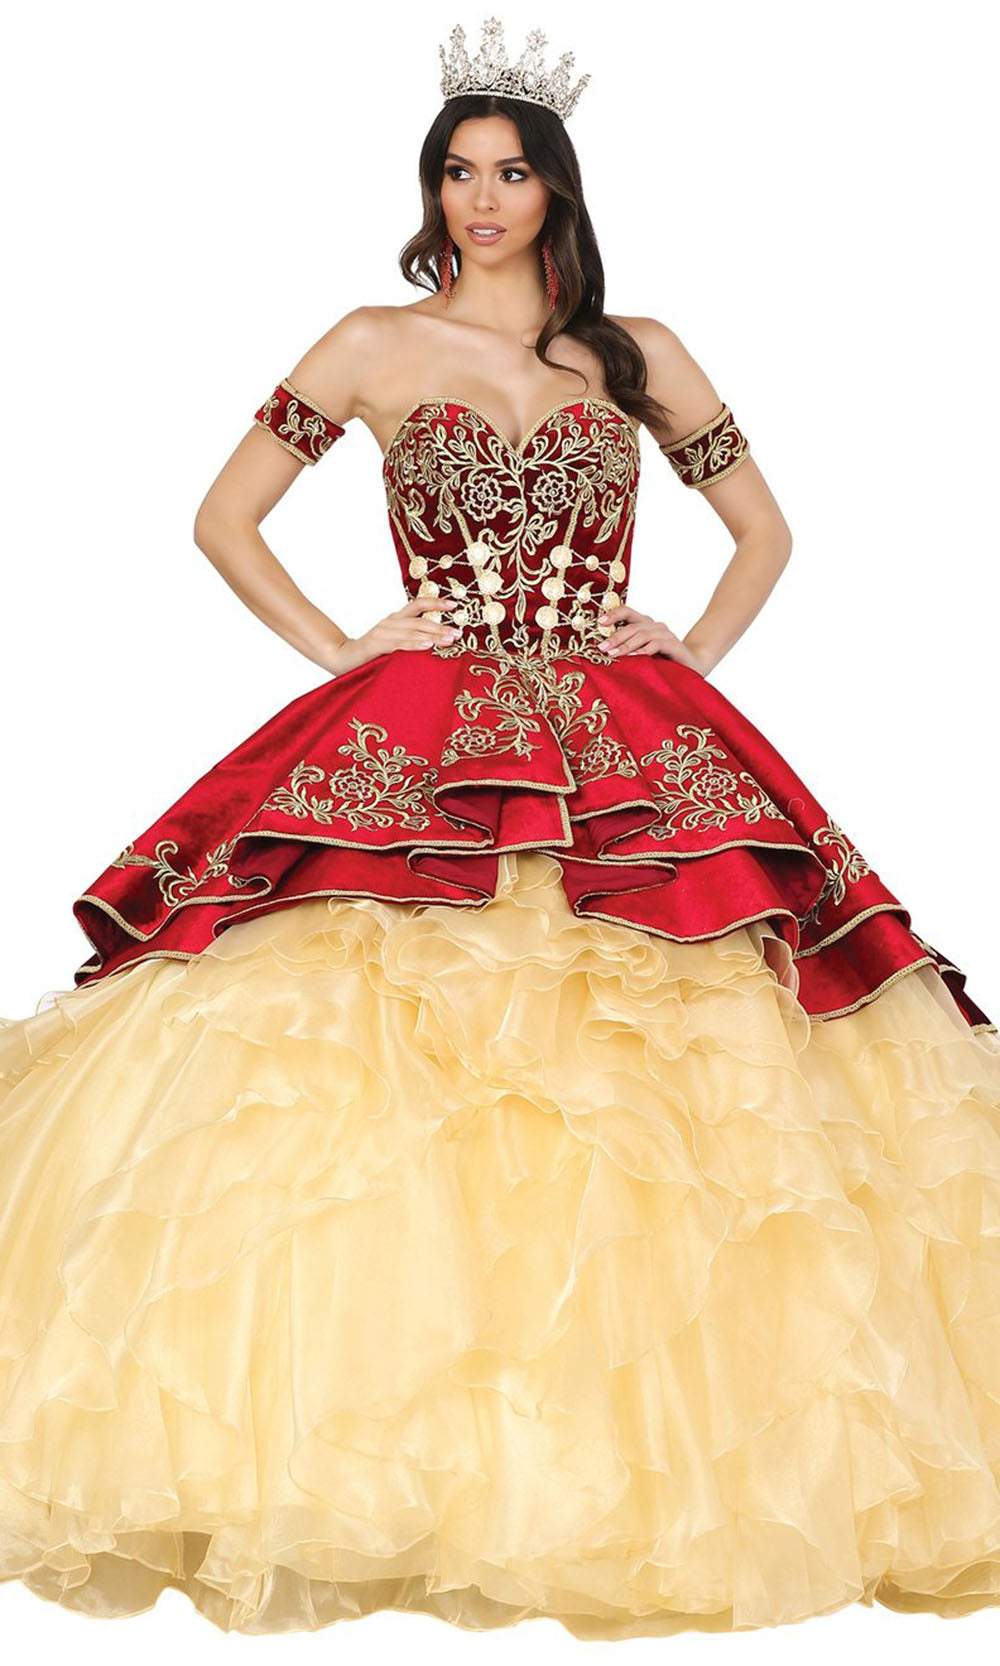 Dancing Queen - 1529 Embroidered Peplum Ruffled Ballgown In Red and Neutral